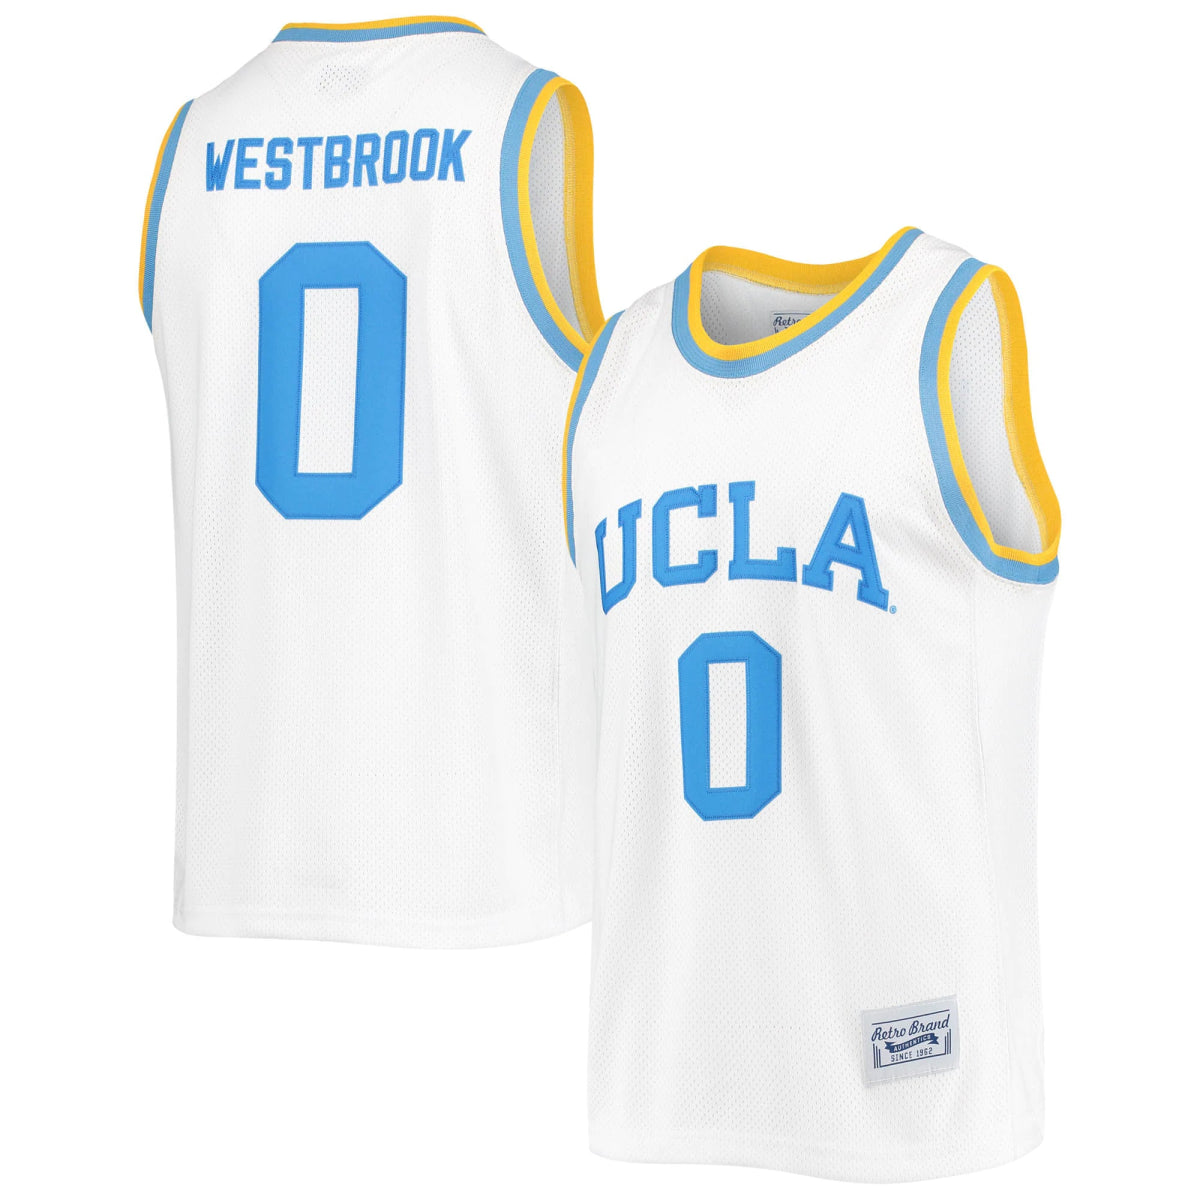 RUSSELL WESTBROOK UCLA COLLEGE JERSEY - Prime Reps